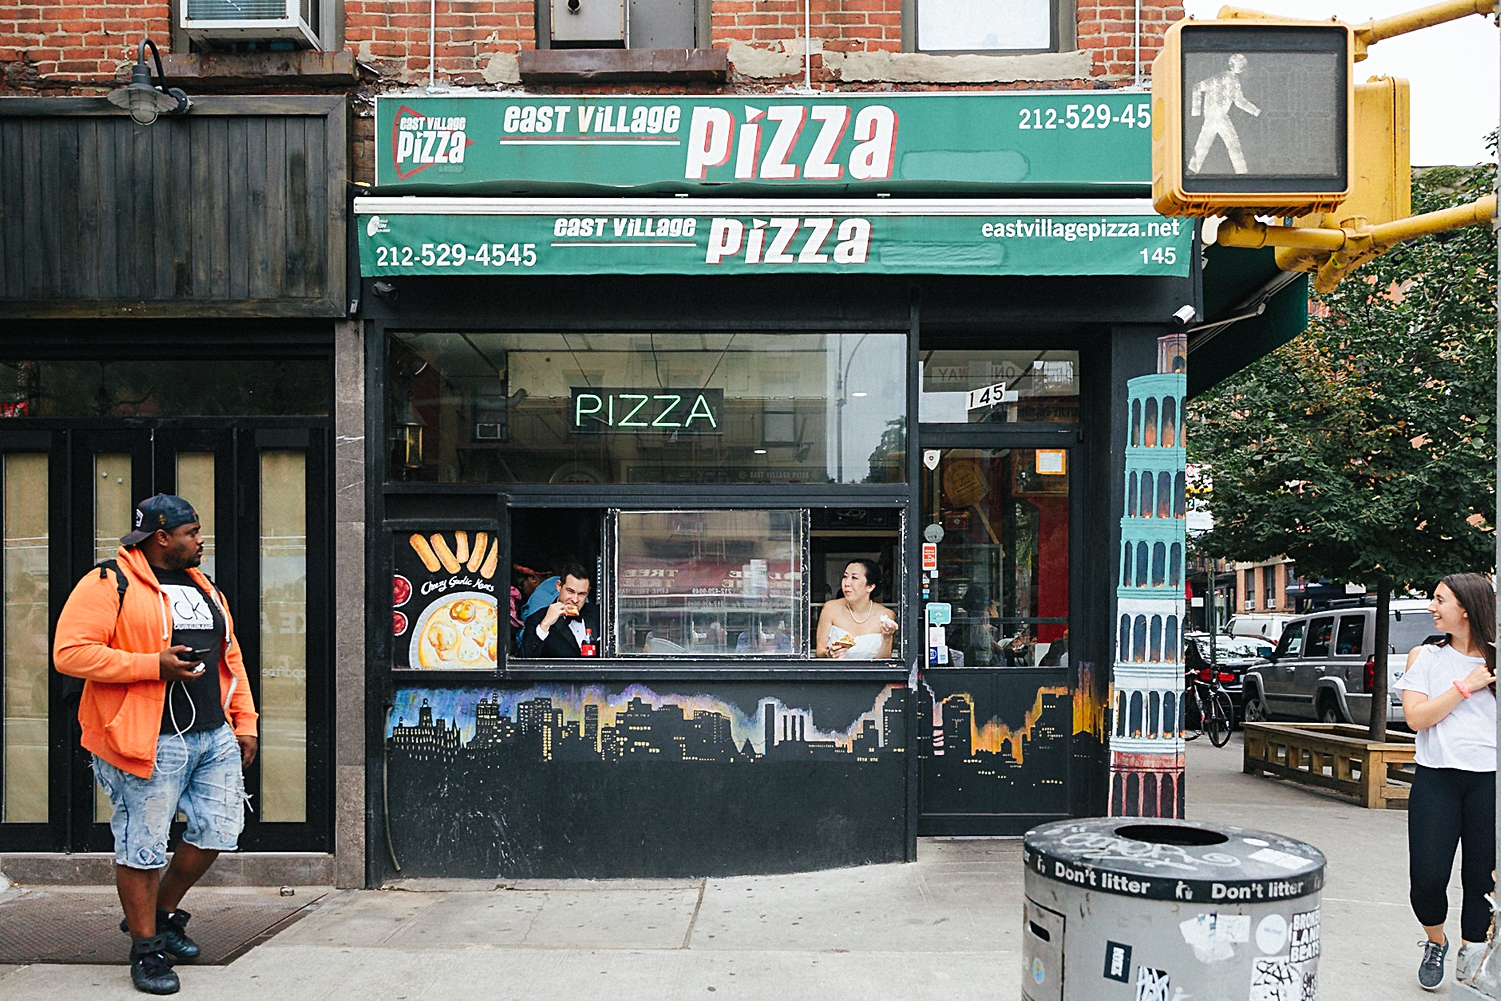 bride and groom eating pizza in new york city pizzeria window